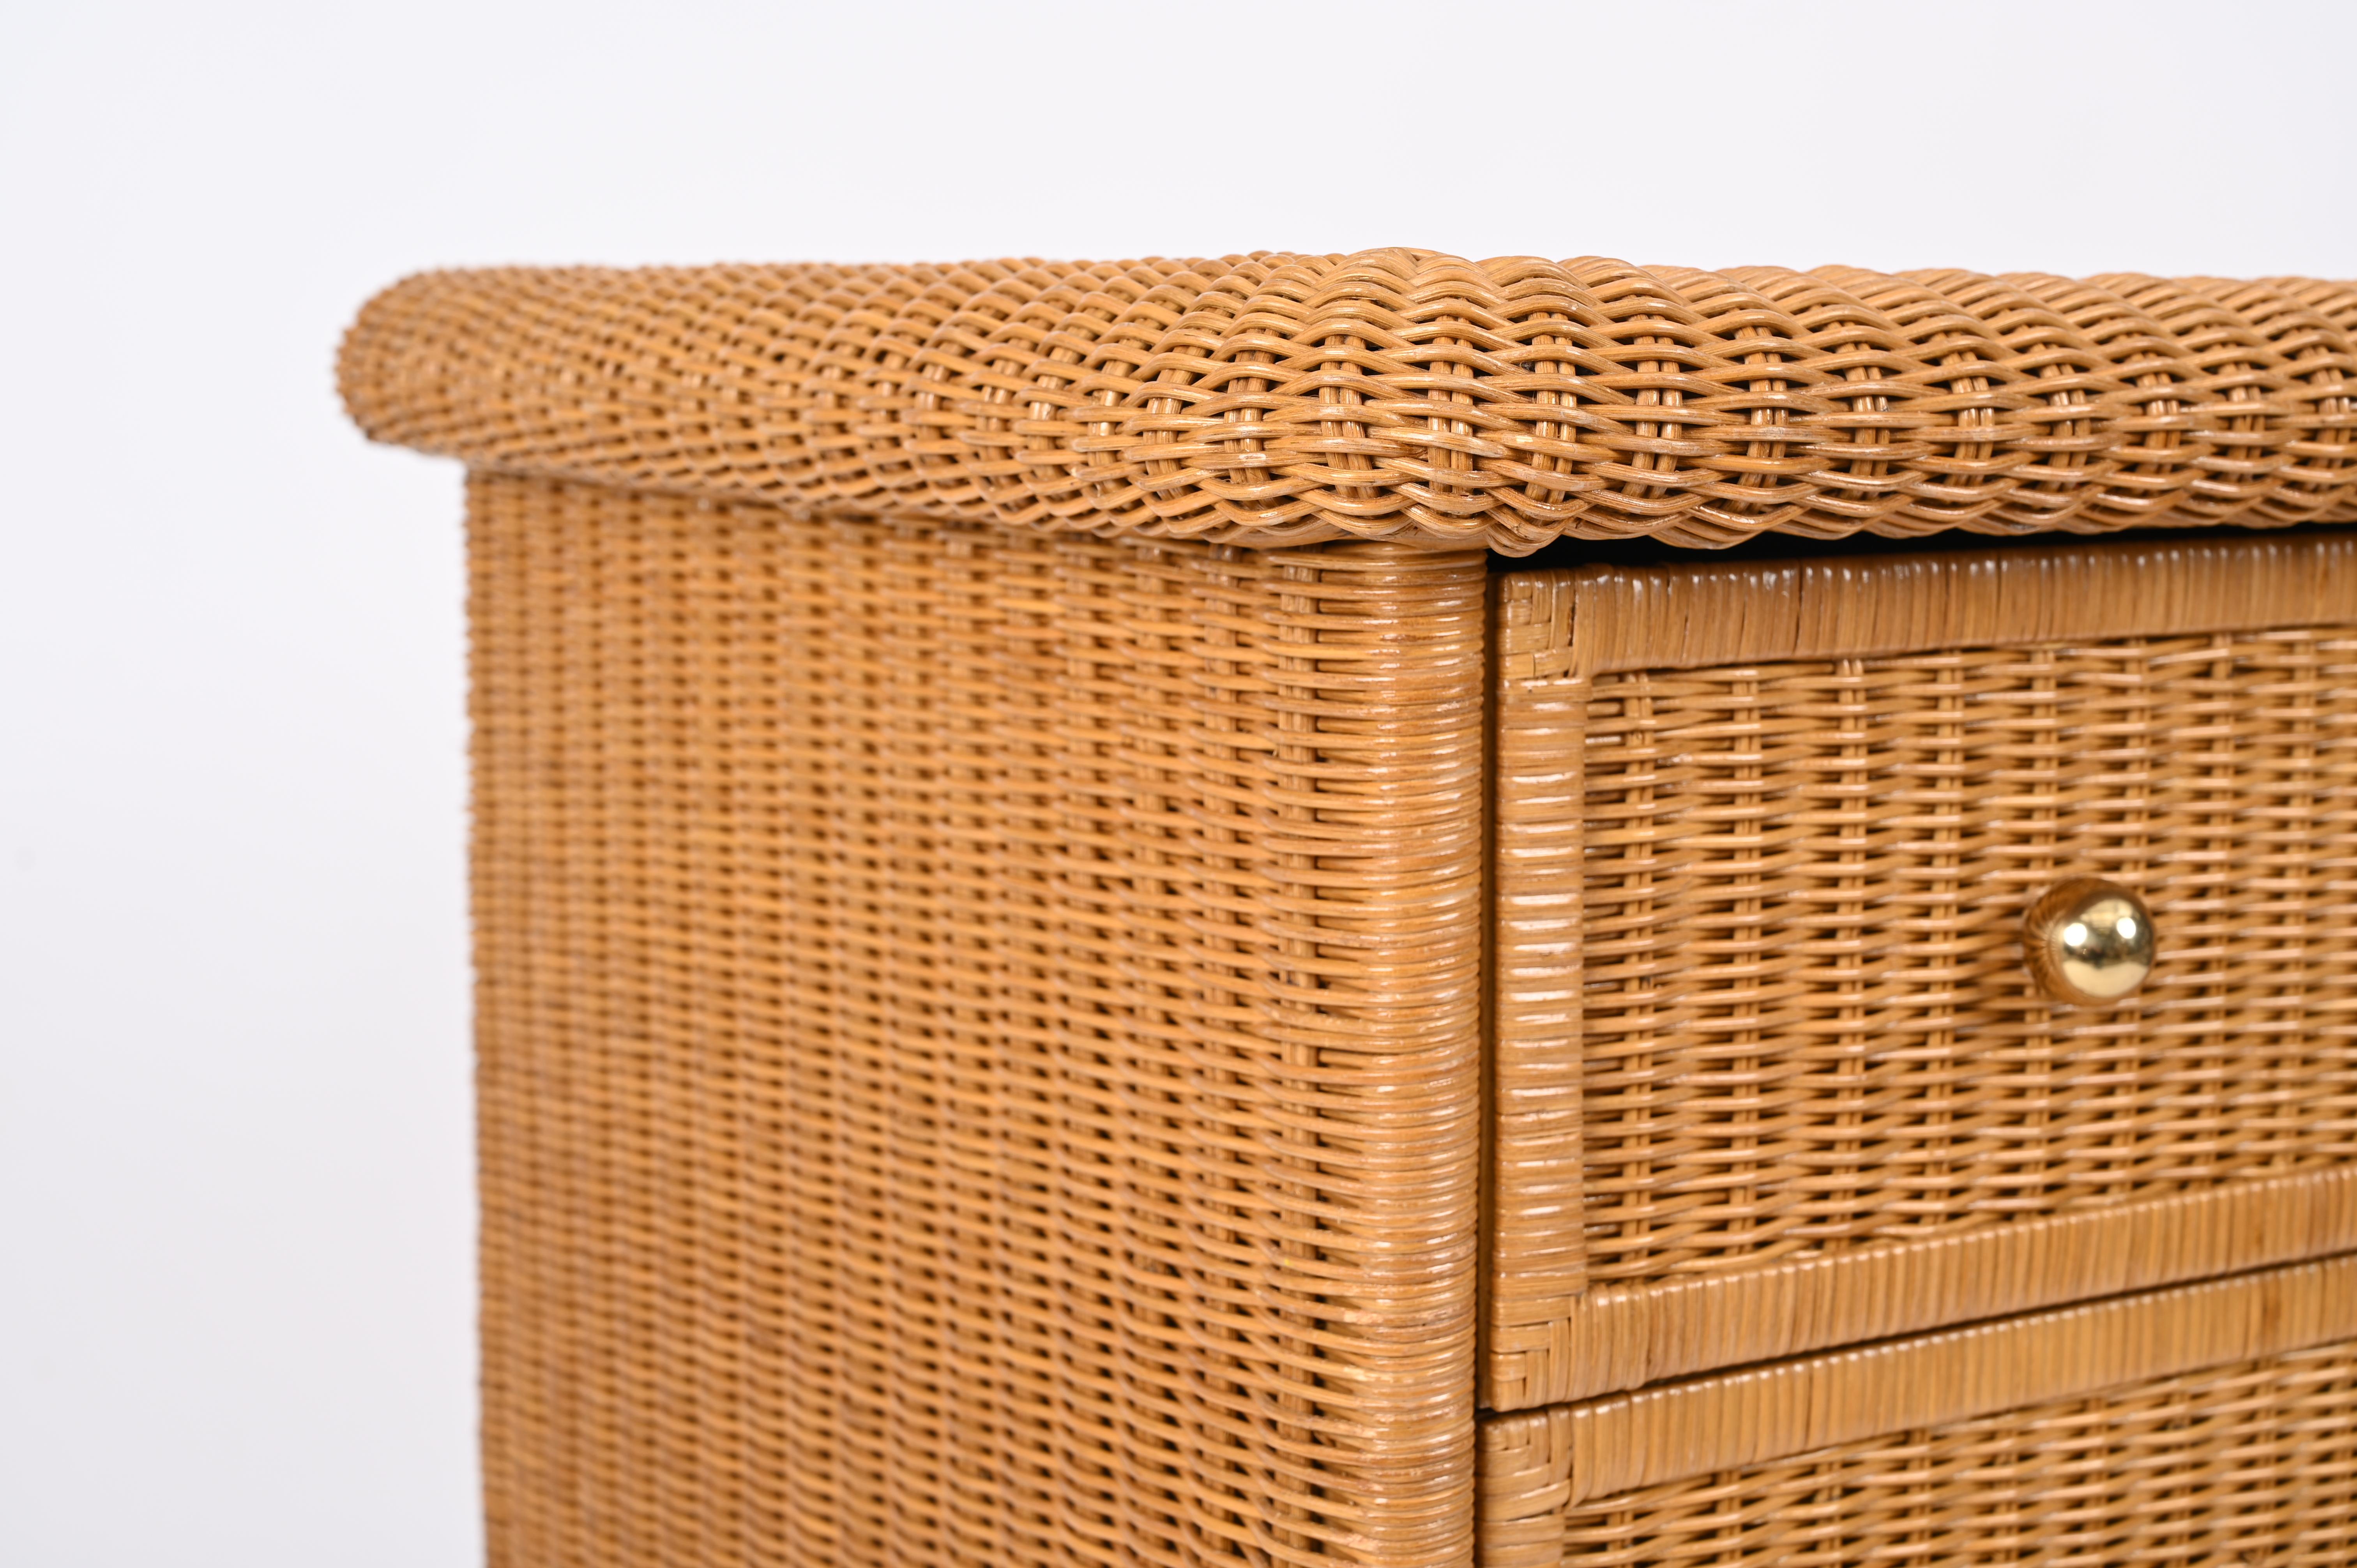 French Riviera Chest of Drawers in Woven Rattan by Vivai del Sud, Italy, 1970s For Sale 8